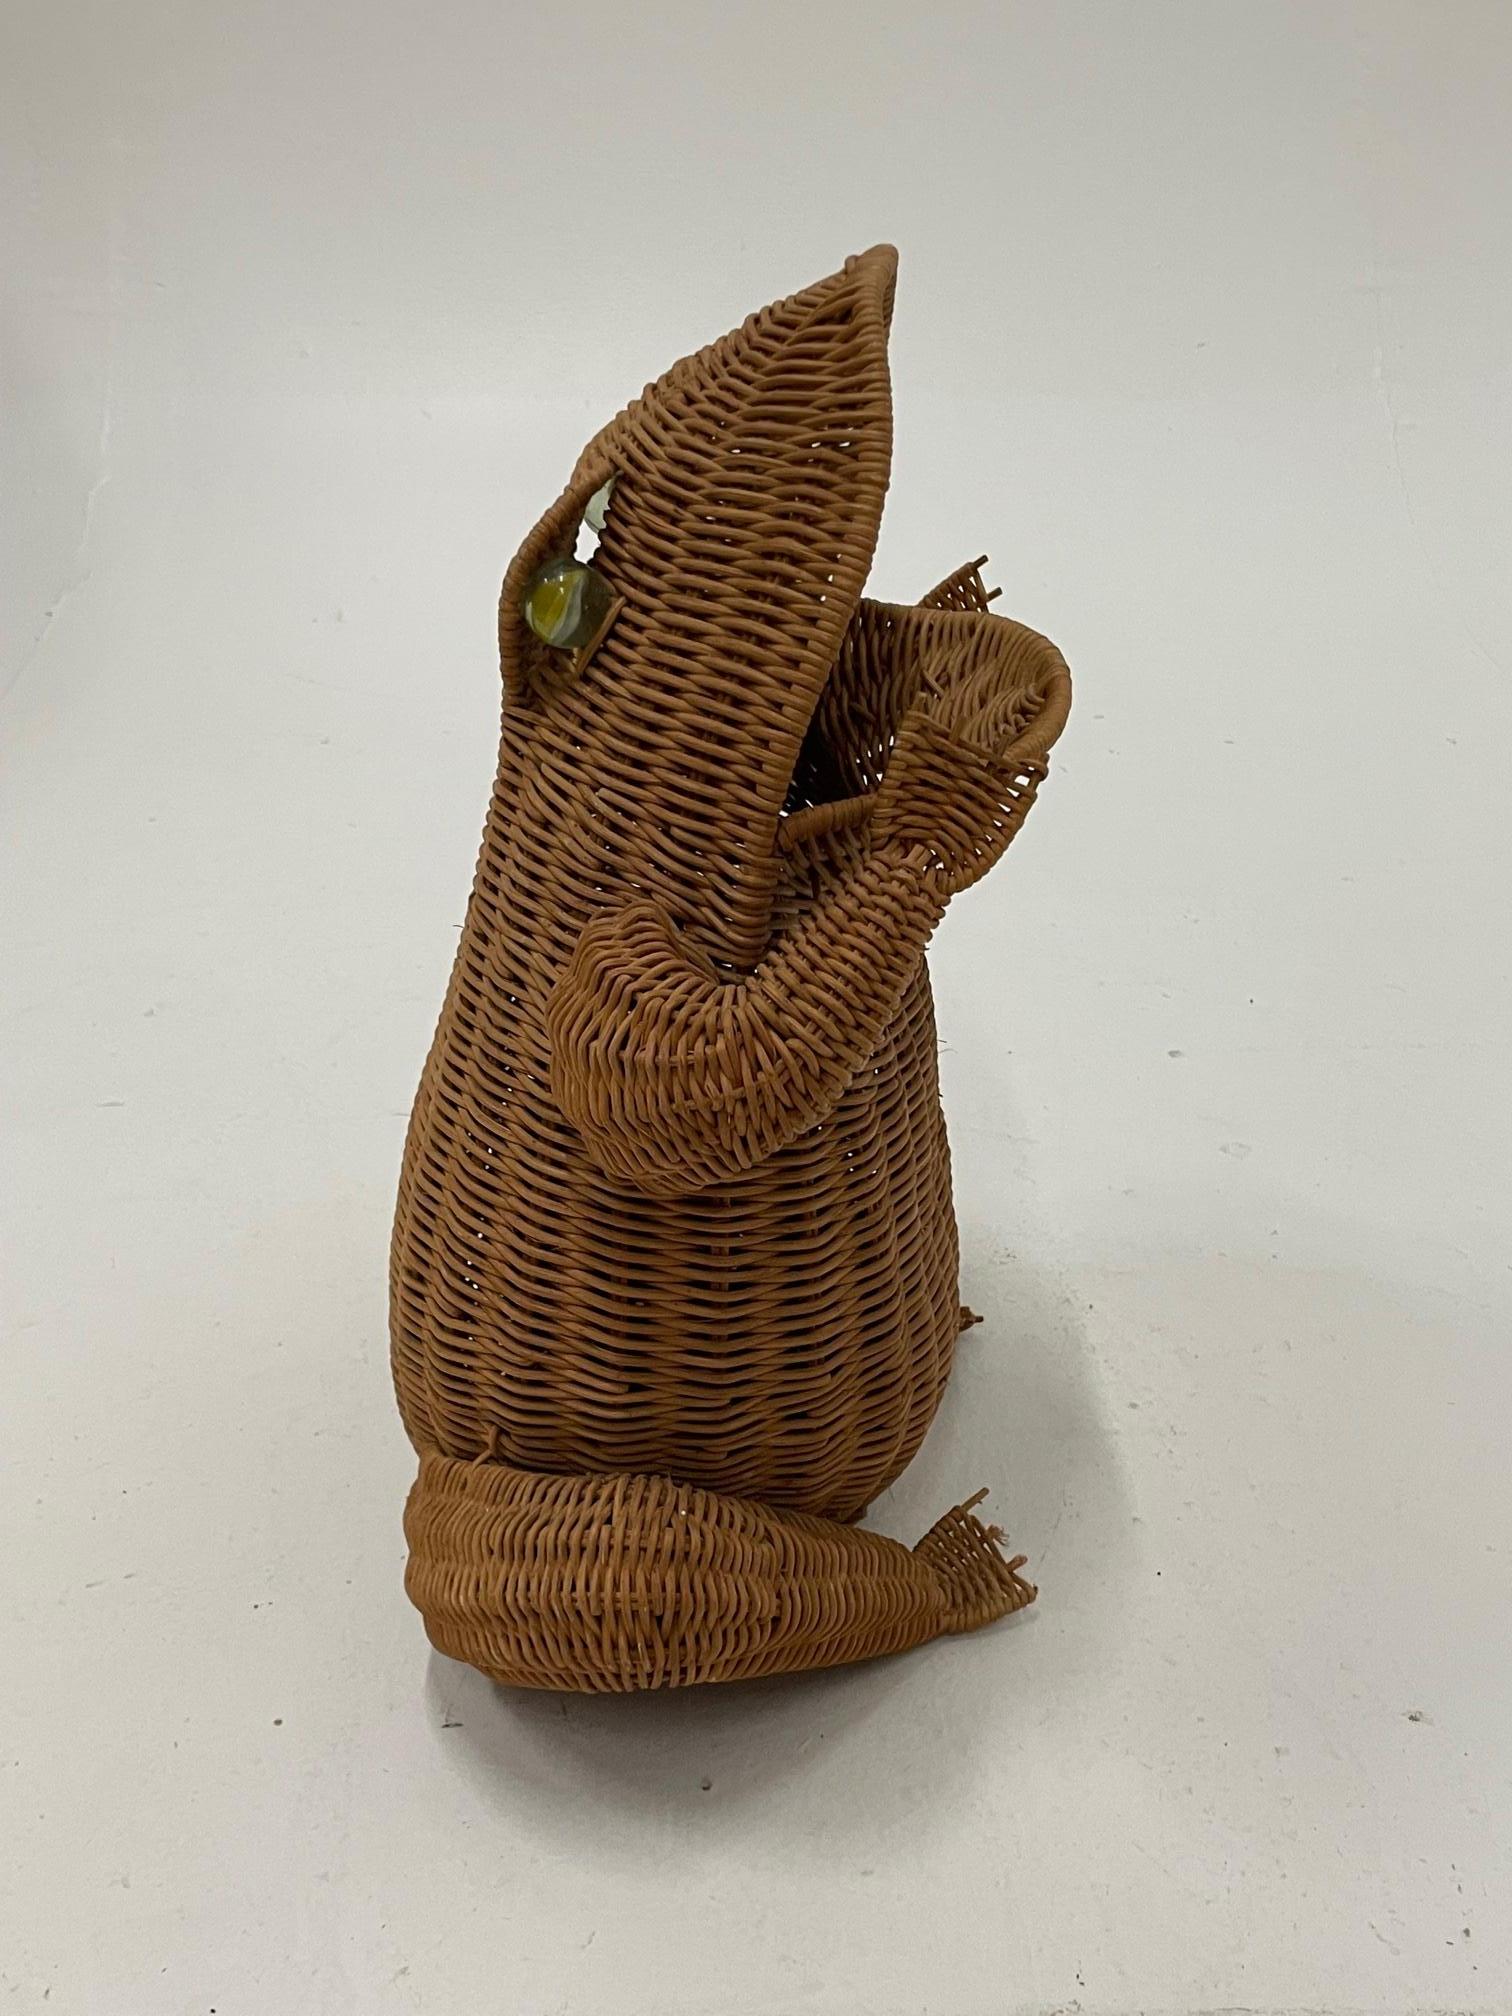 Whimsical conversation piece wicker magazine holder in the shape of a seated frog having open mouth and original glass eyes.